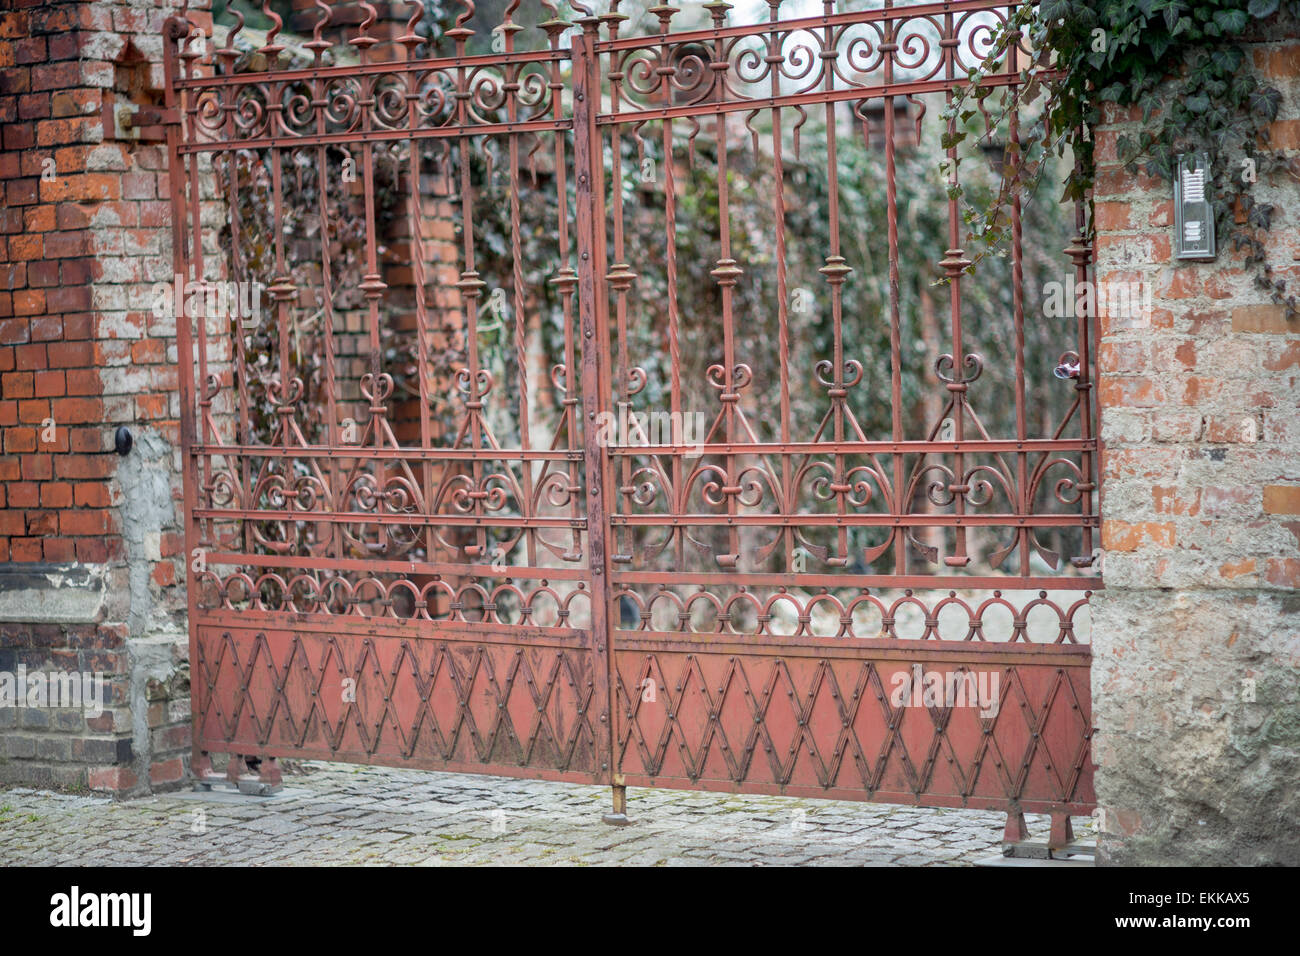 Old ornamented iron gate Stock Photo